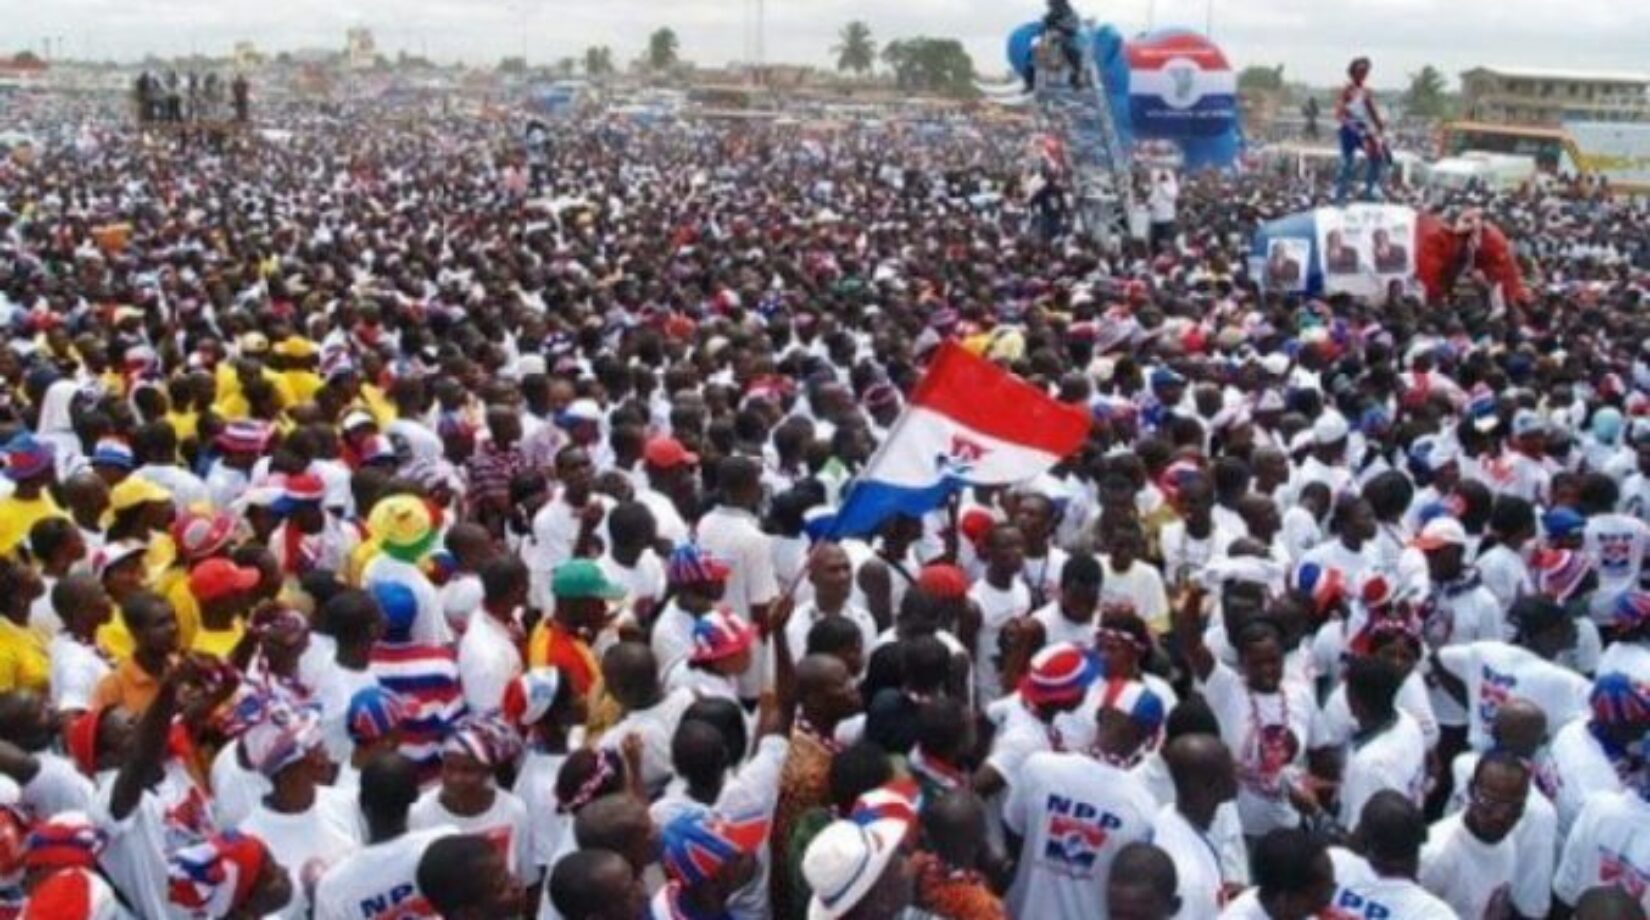 NPP’s Ability to Negotiate Better under Crisis make us Better Managers of the Economy than the NDC-NPP man brags